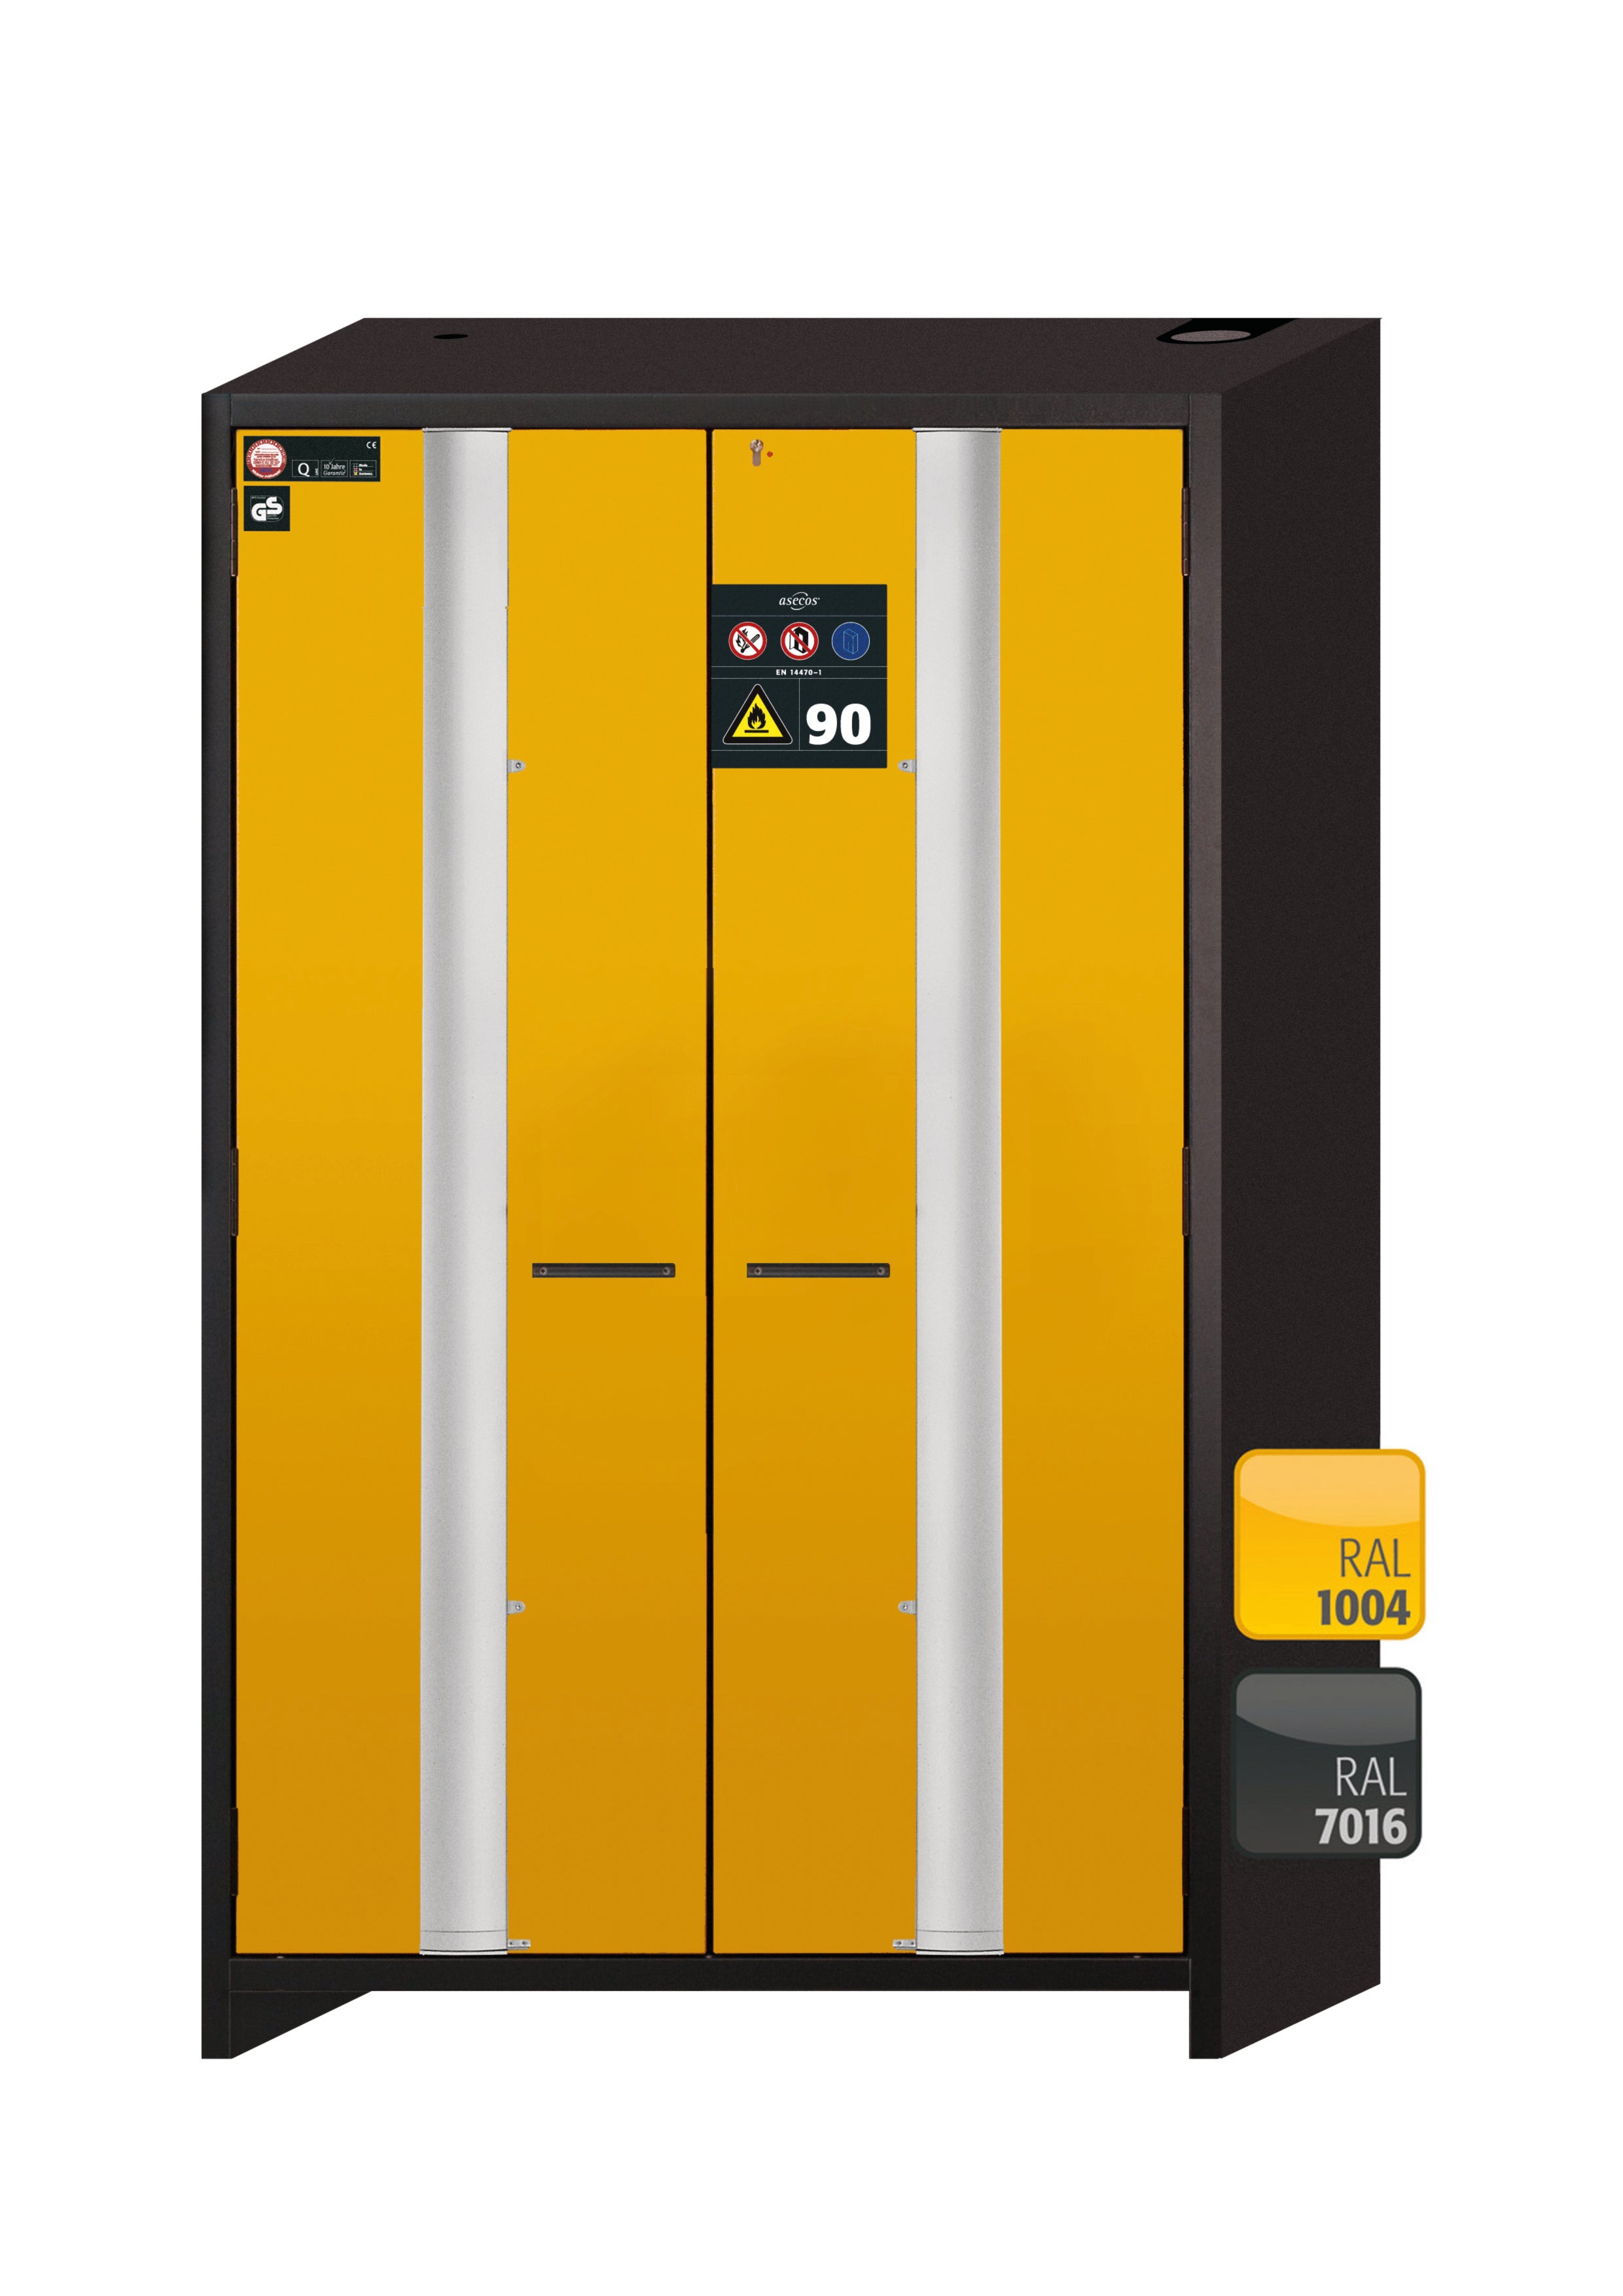 Type 90 safety cabinet Q-PHOENIX-90 model Q90.195.120.FD in safety yellow RAL 1004 with 3x standard pull-out tray (sheet steel)